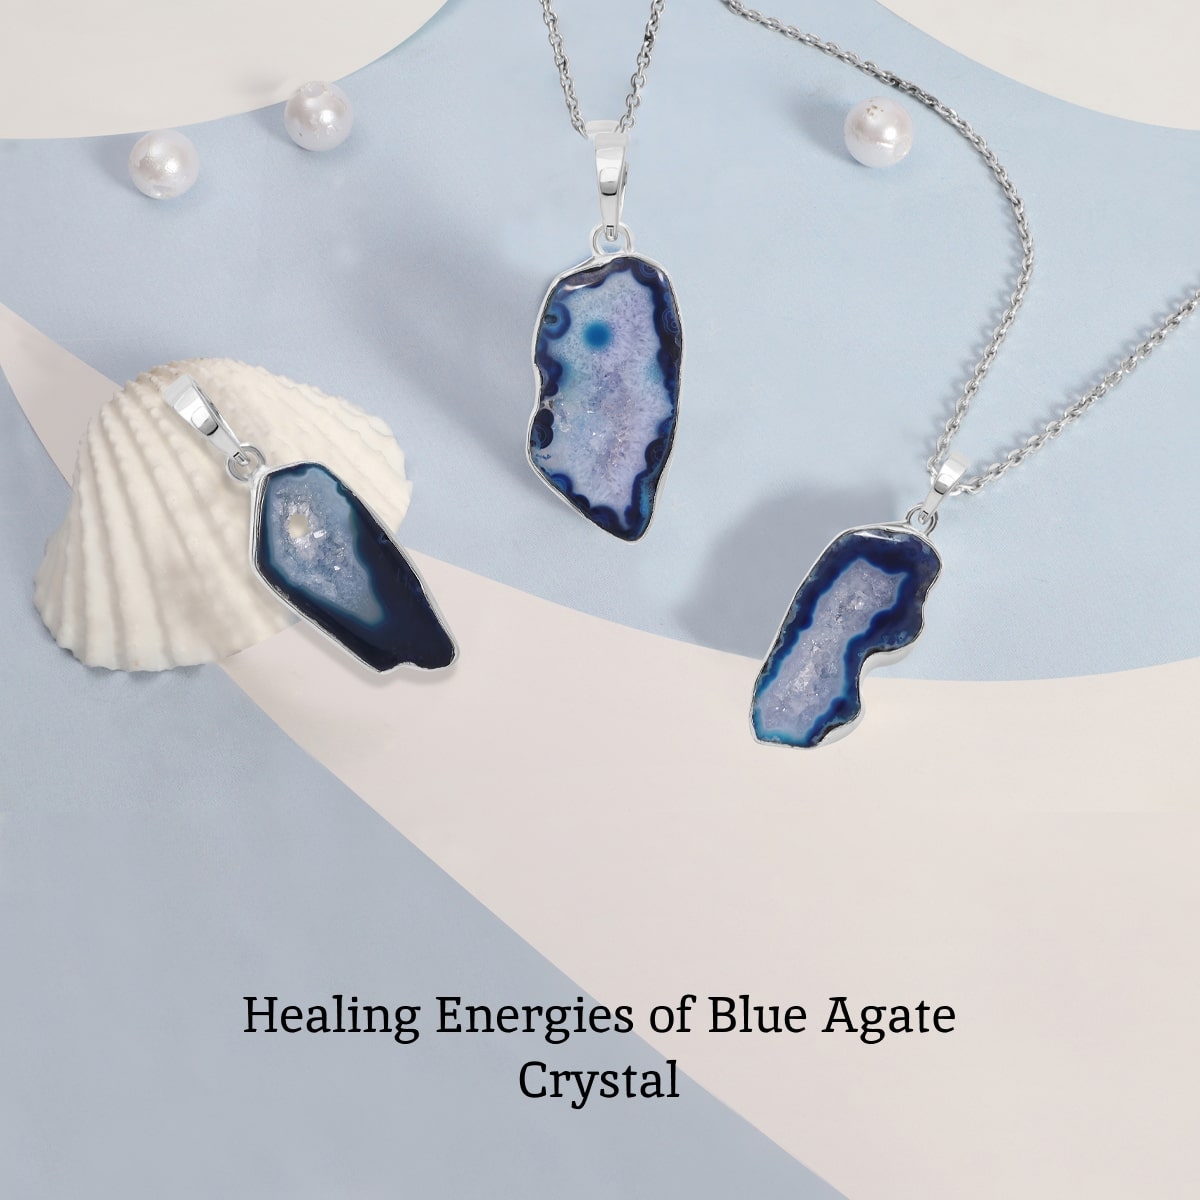 How to Care & Maintain Your Blue Agate Jewelry